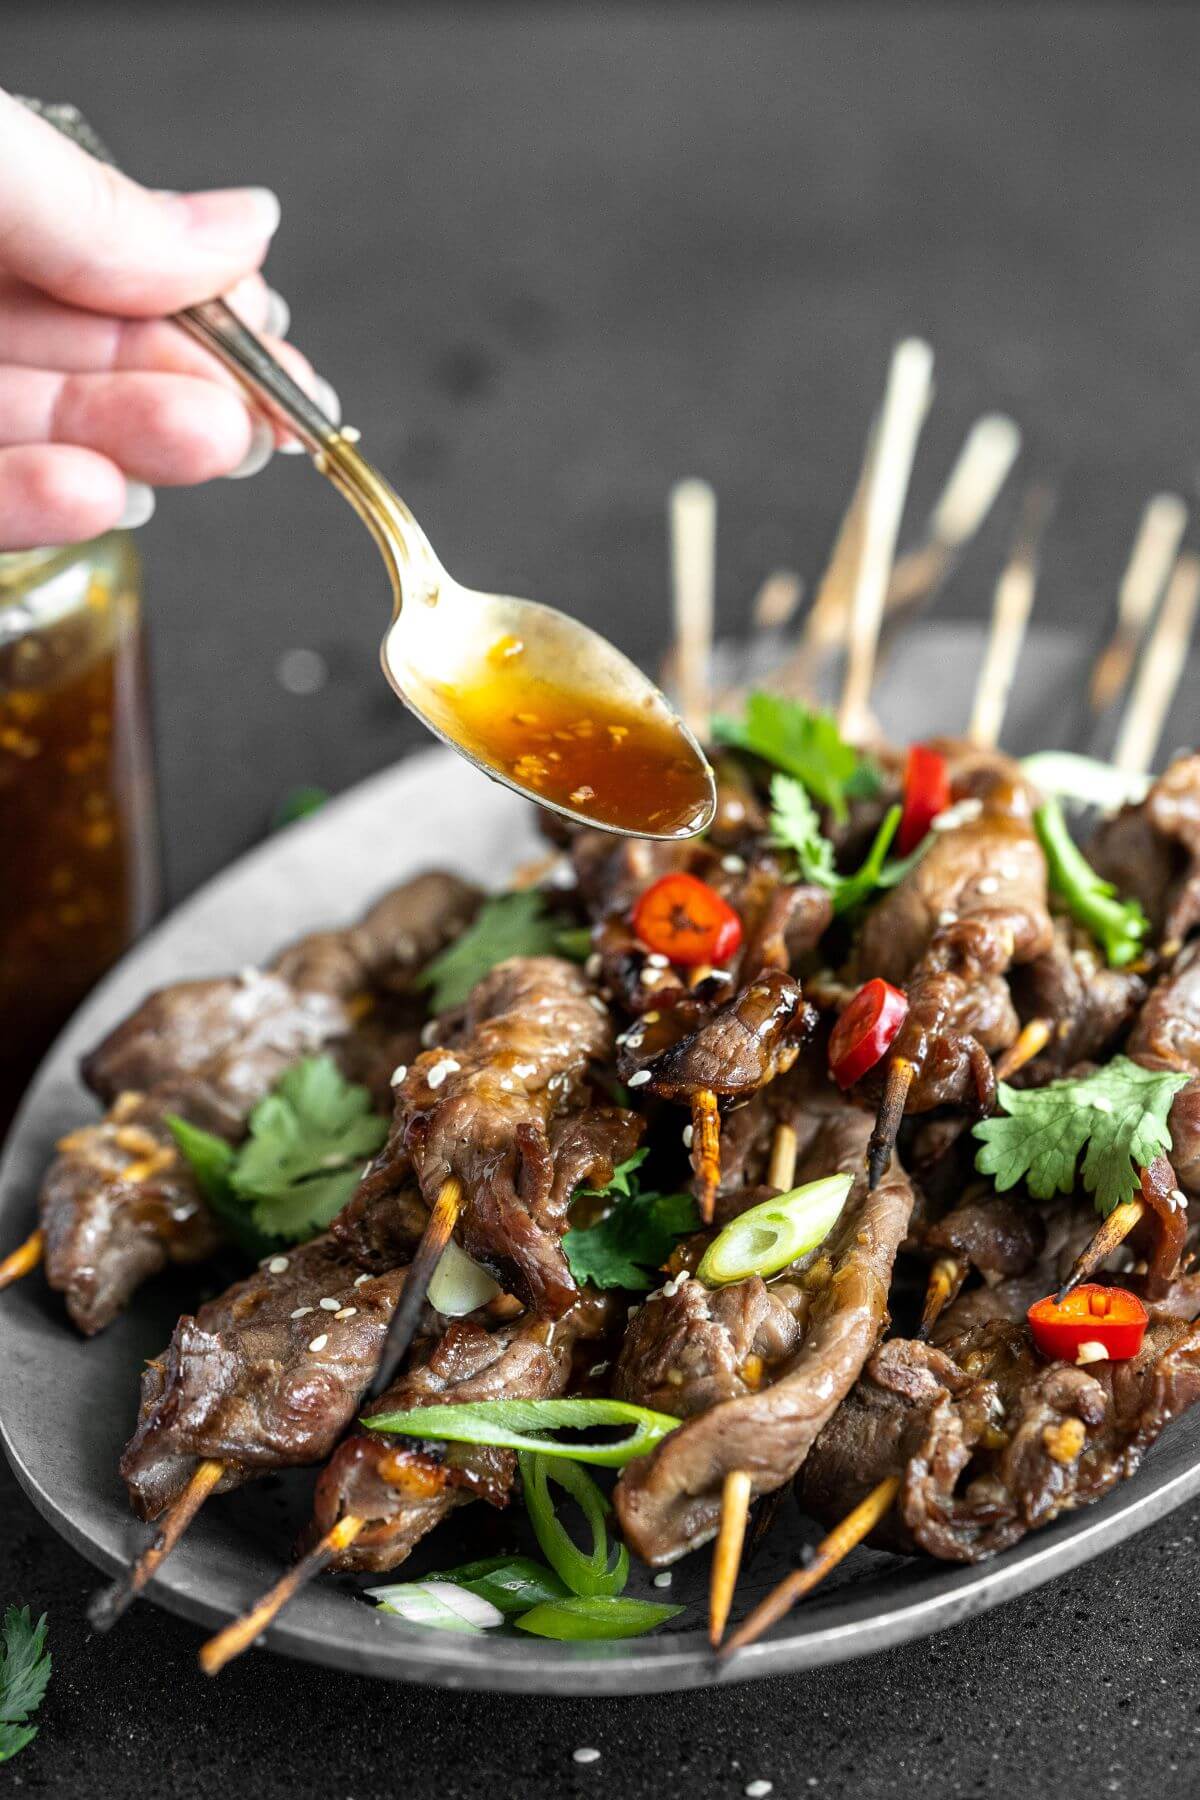 Teriyaki sauce being spooned over a platter of grilled Teriyaki Beef Sticks garnished with chopped green herbs and red hot peppers.